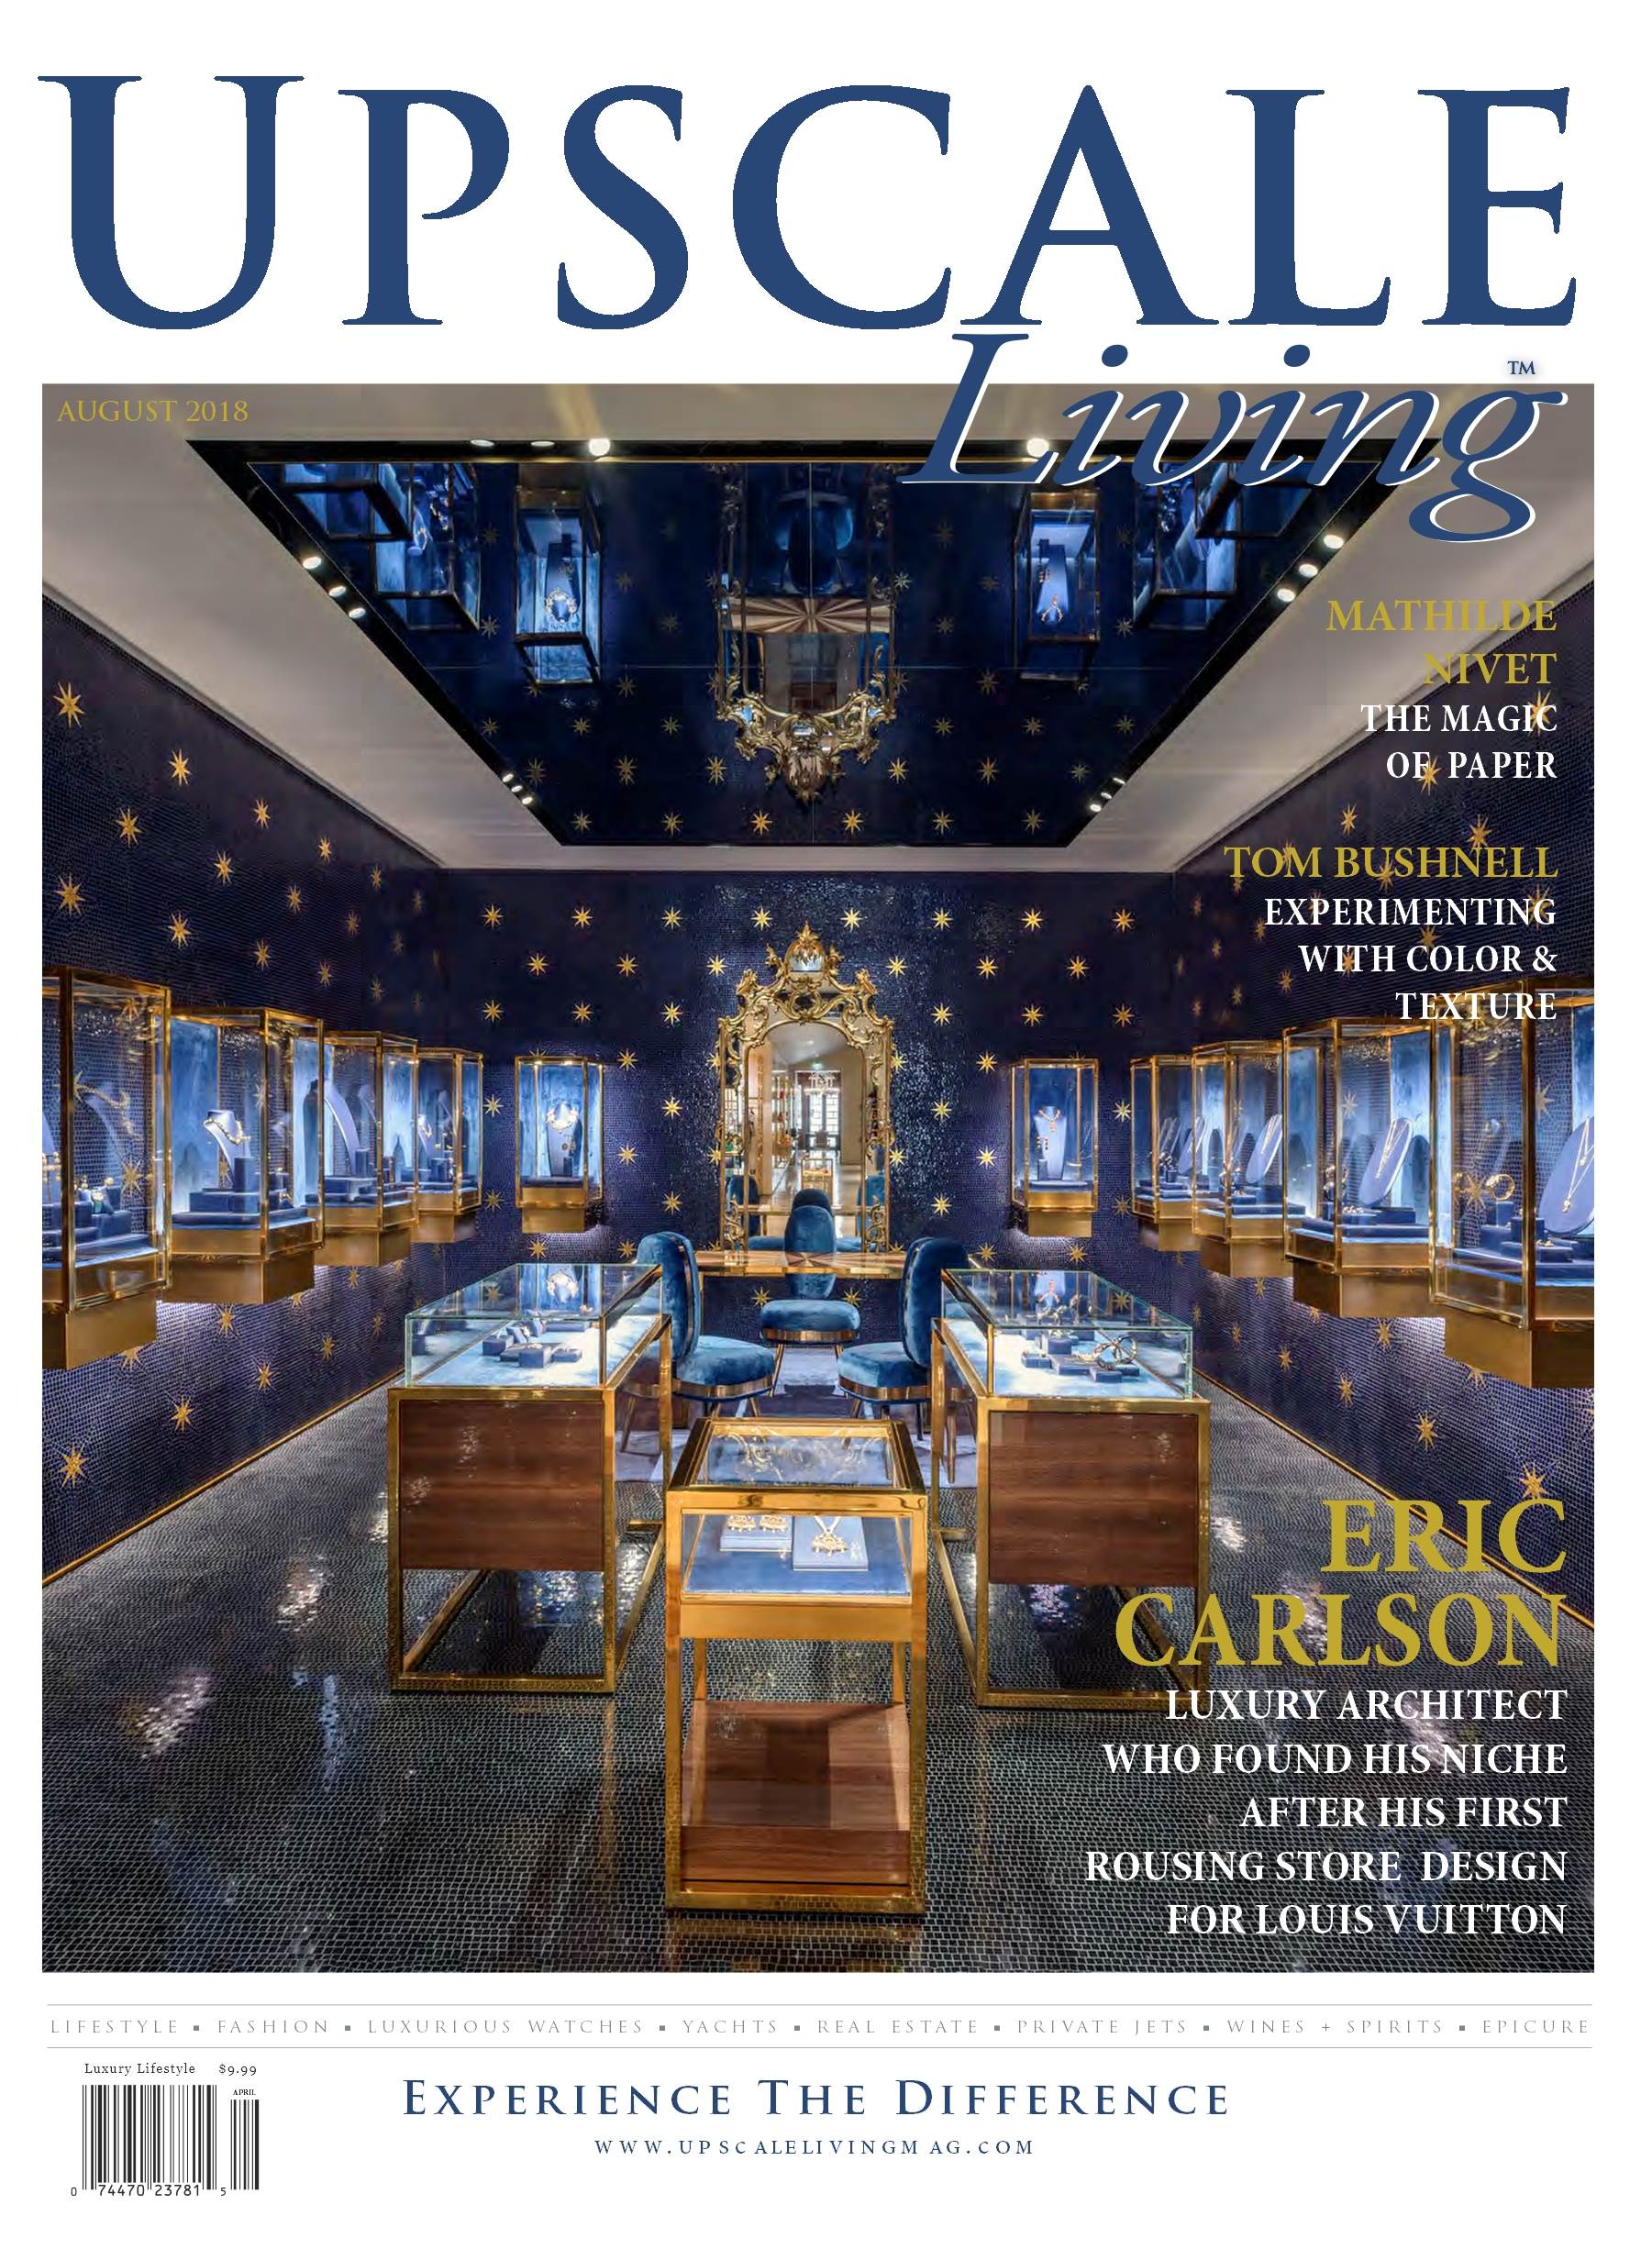 Discover the Upscale Living Magazine and His World's Luxury Portal